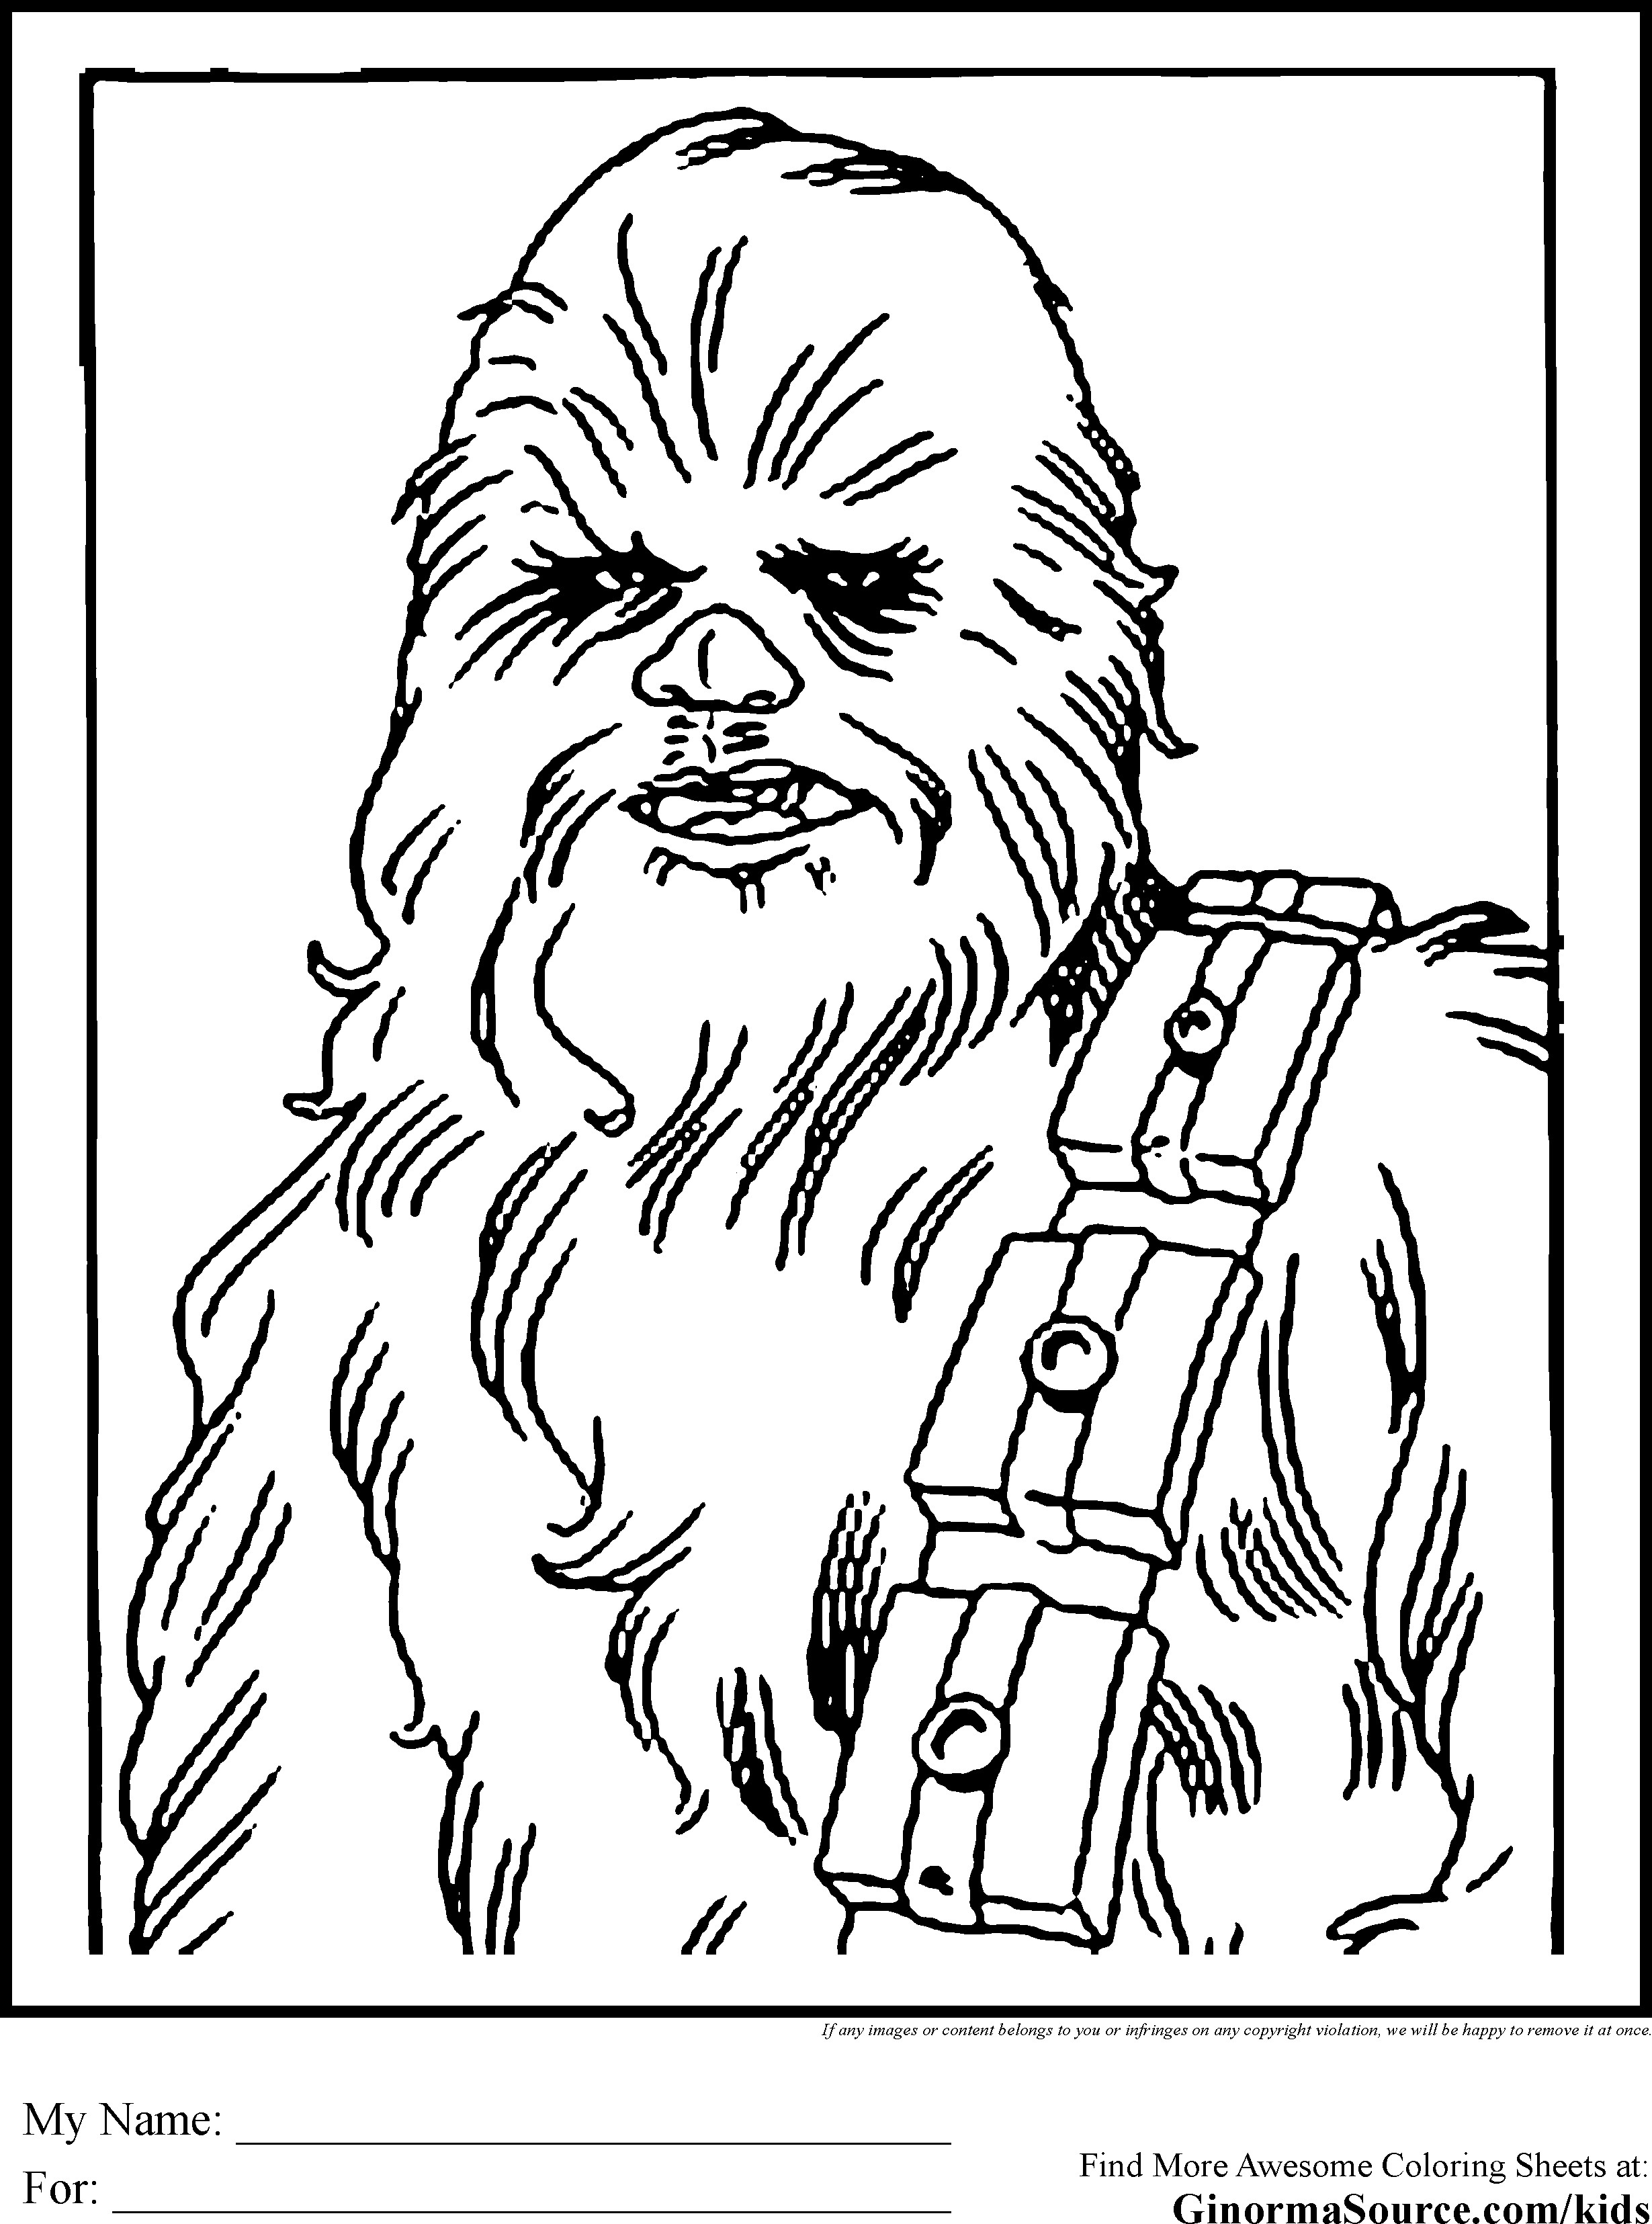 Star Wars Birthday Coloring Pages At GetColorings Free Printable Colorings Pages To Print